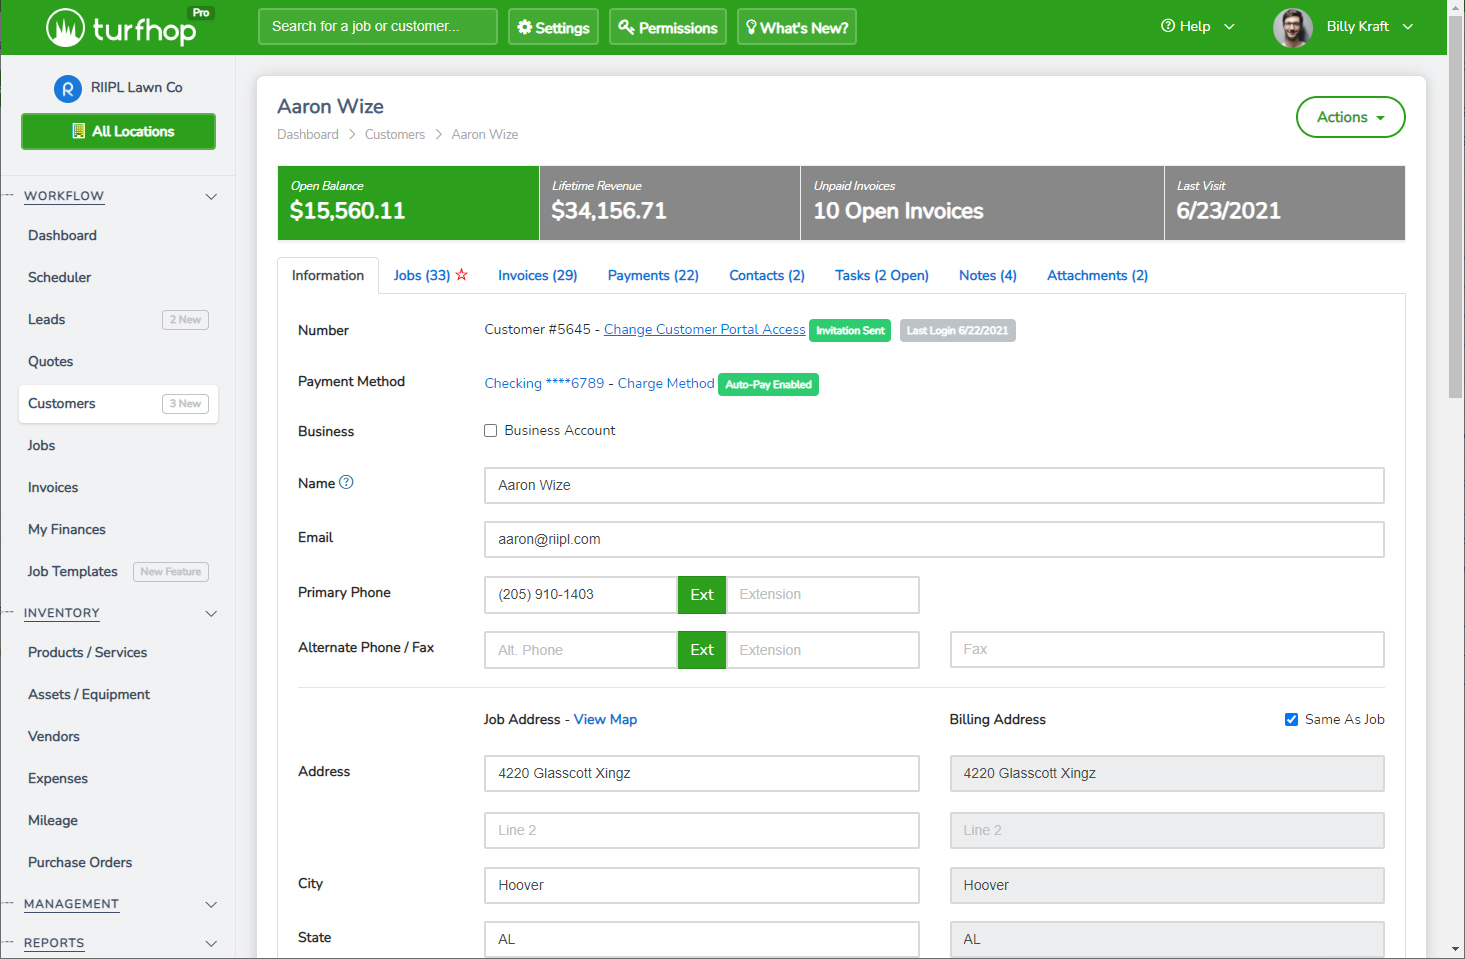 Customer Screen - Setup portal access, update payment method, and much more